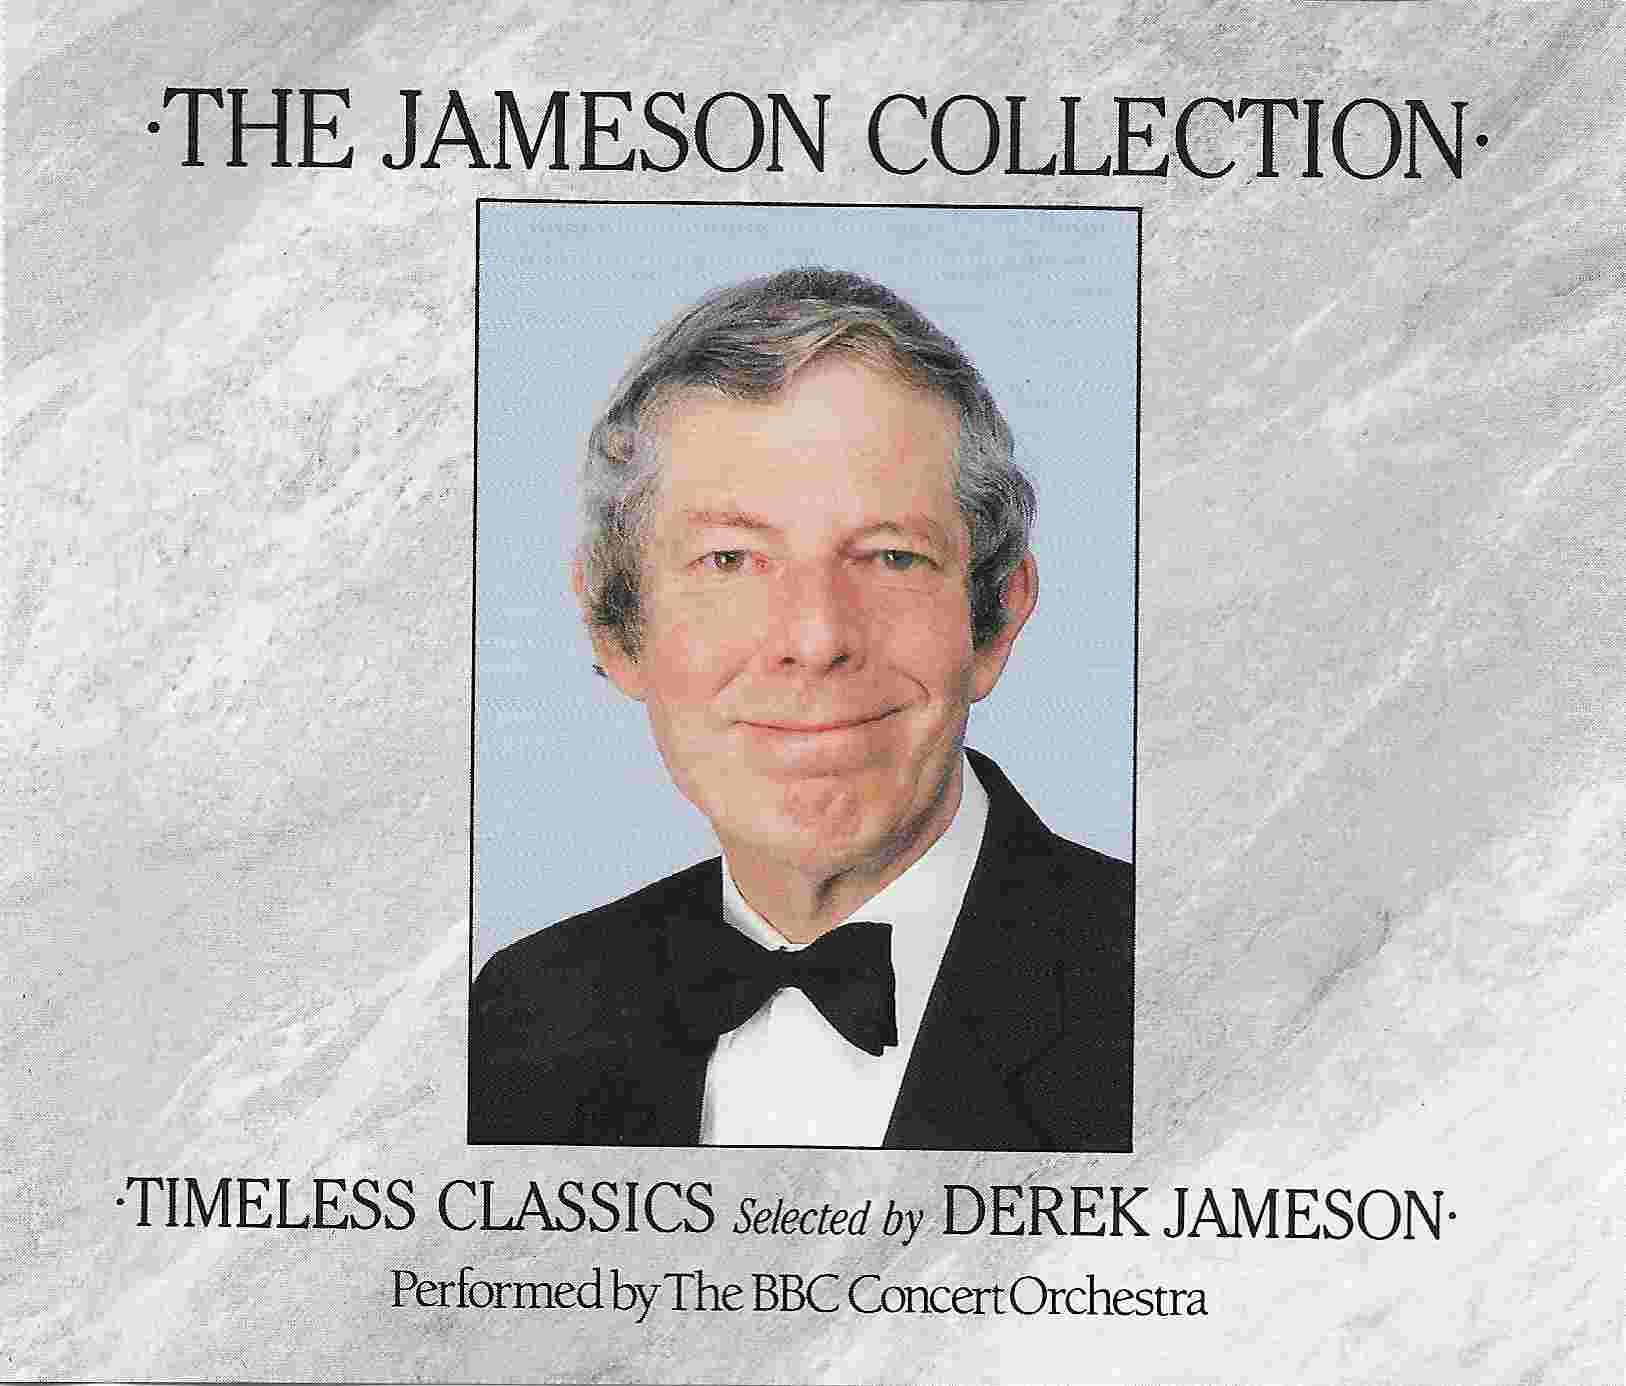 Picture of BBCCD2002 Derek Jameson collection by artist Derek Jameson  from the BBC cds - Records and Tapes library